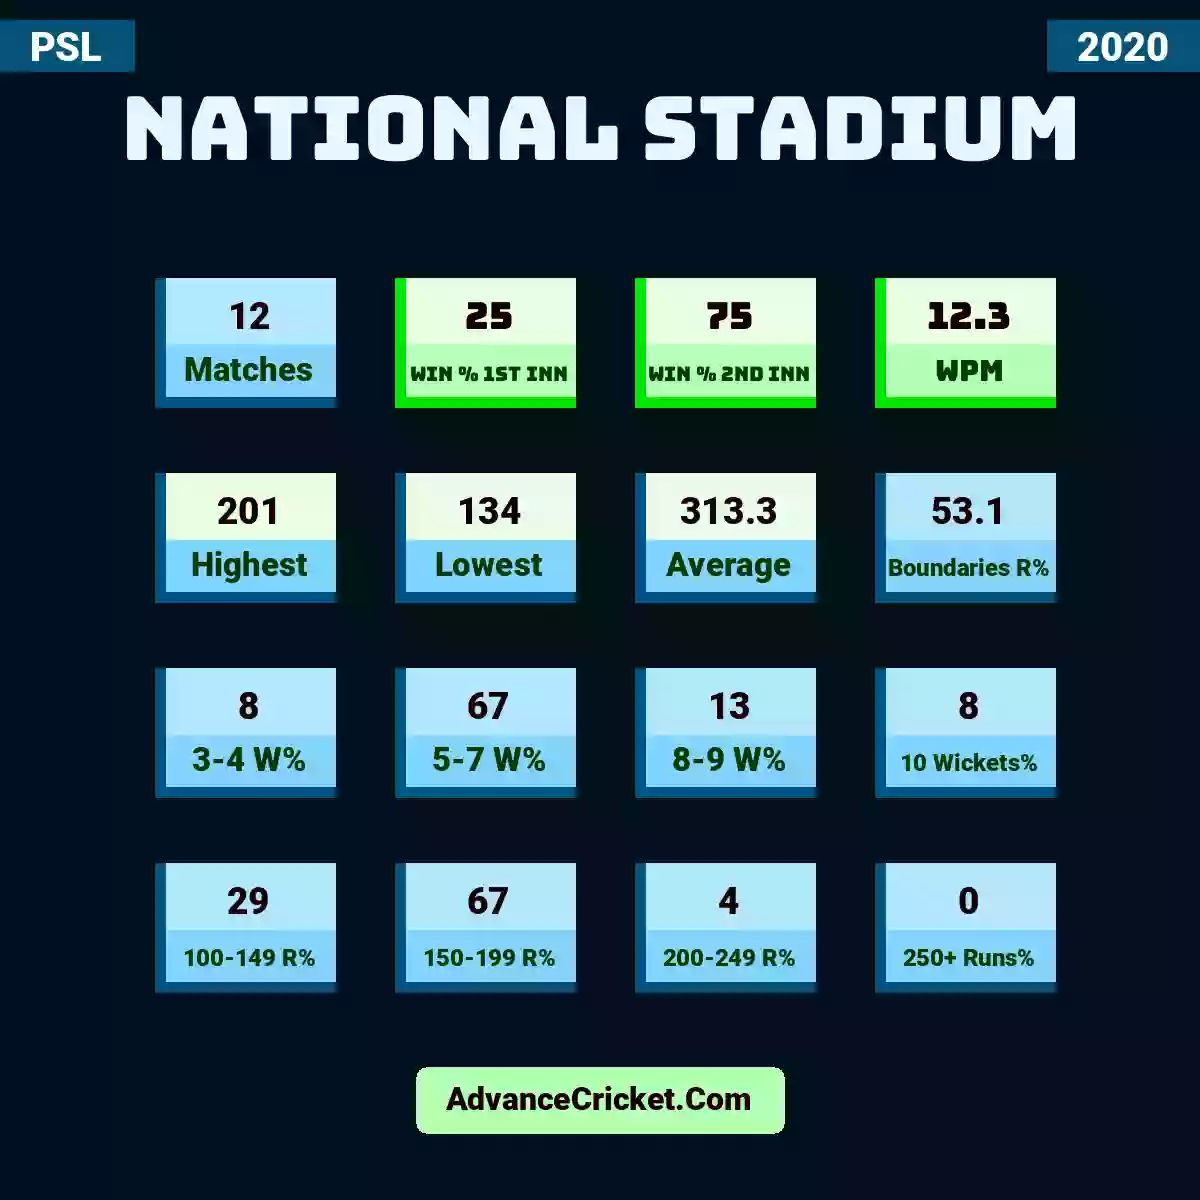 Image showing National Stadium with Matches: 12, Win % 1st Inn: 25, Win % 2nd Inn: 75, WPM: 12.3, Highest: 201, Lowest: 134, Average: 313.3, Boundaries R%: 53.1, 3-4 W%: 8, 5-7 W%: 67, 8-9 W%: 13, 10 Wickets%: 8, 100-149 R%: 29, 150-199 R%: 67, 200-249 R%: 4, 250+ Runs%: 0.